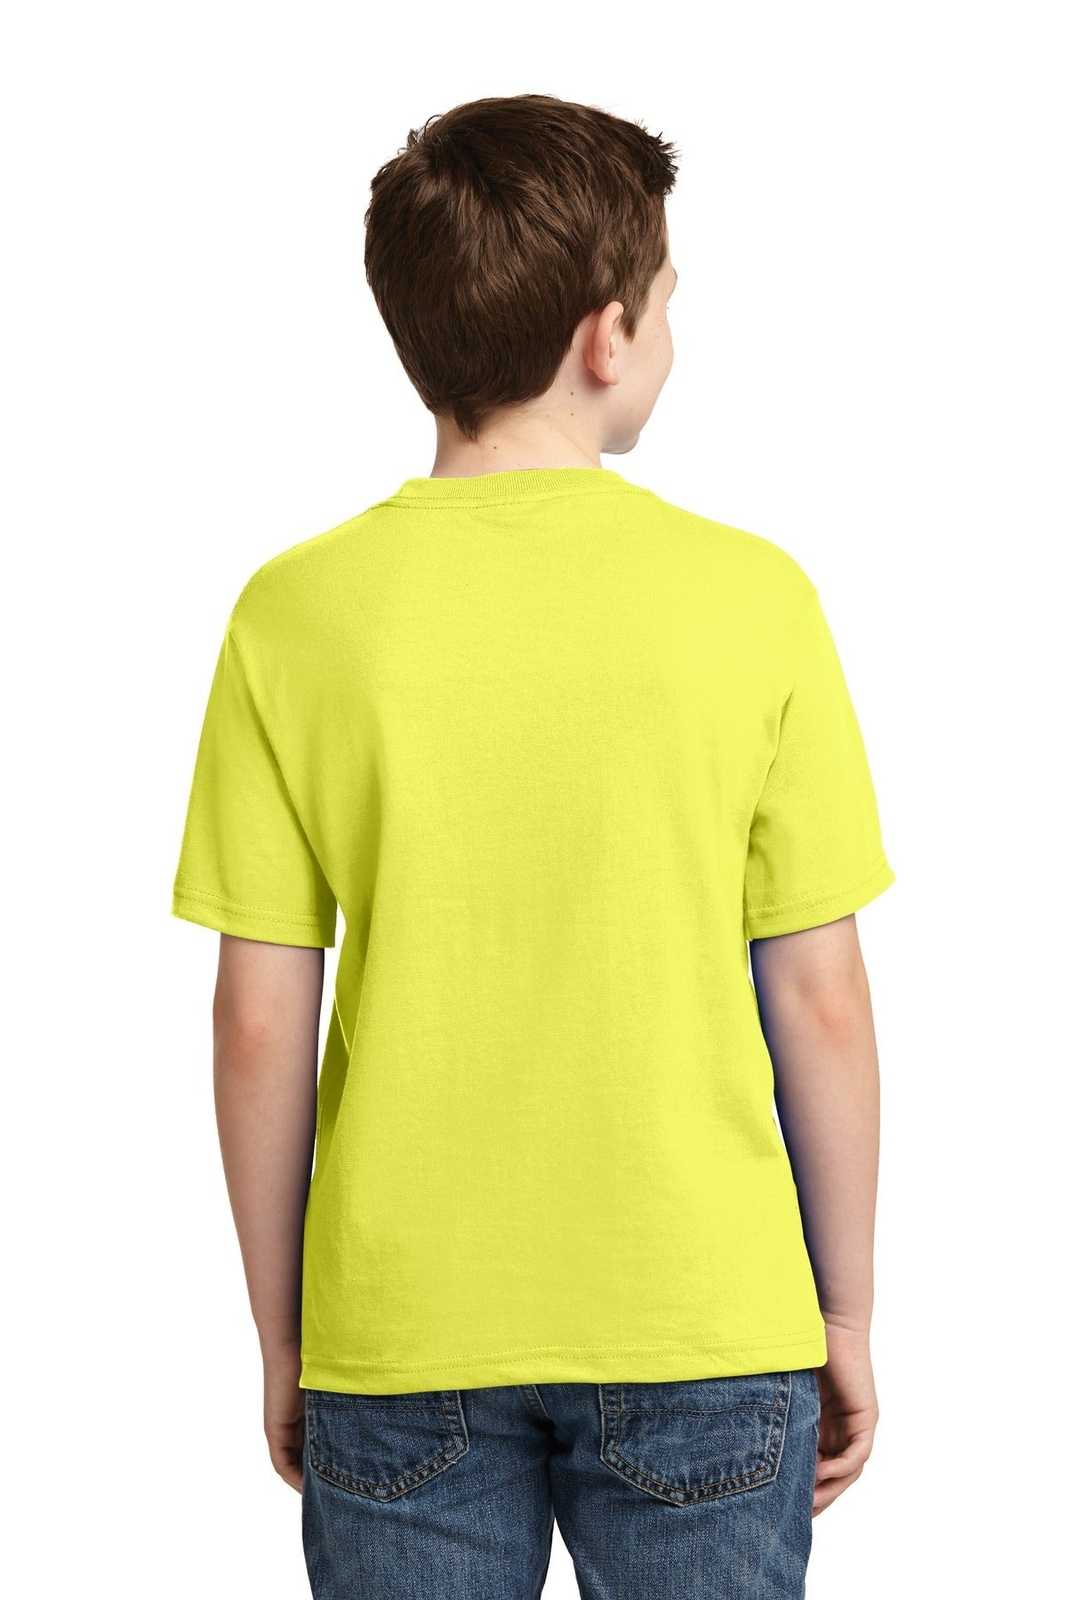 Jerzees 29B Youth Dri-Power 50/50 Cotton/Poly T-Shirt - Neon Yellow - HIT a Double